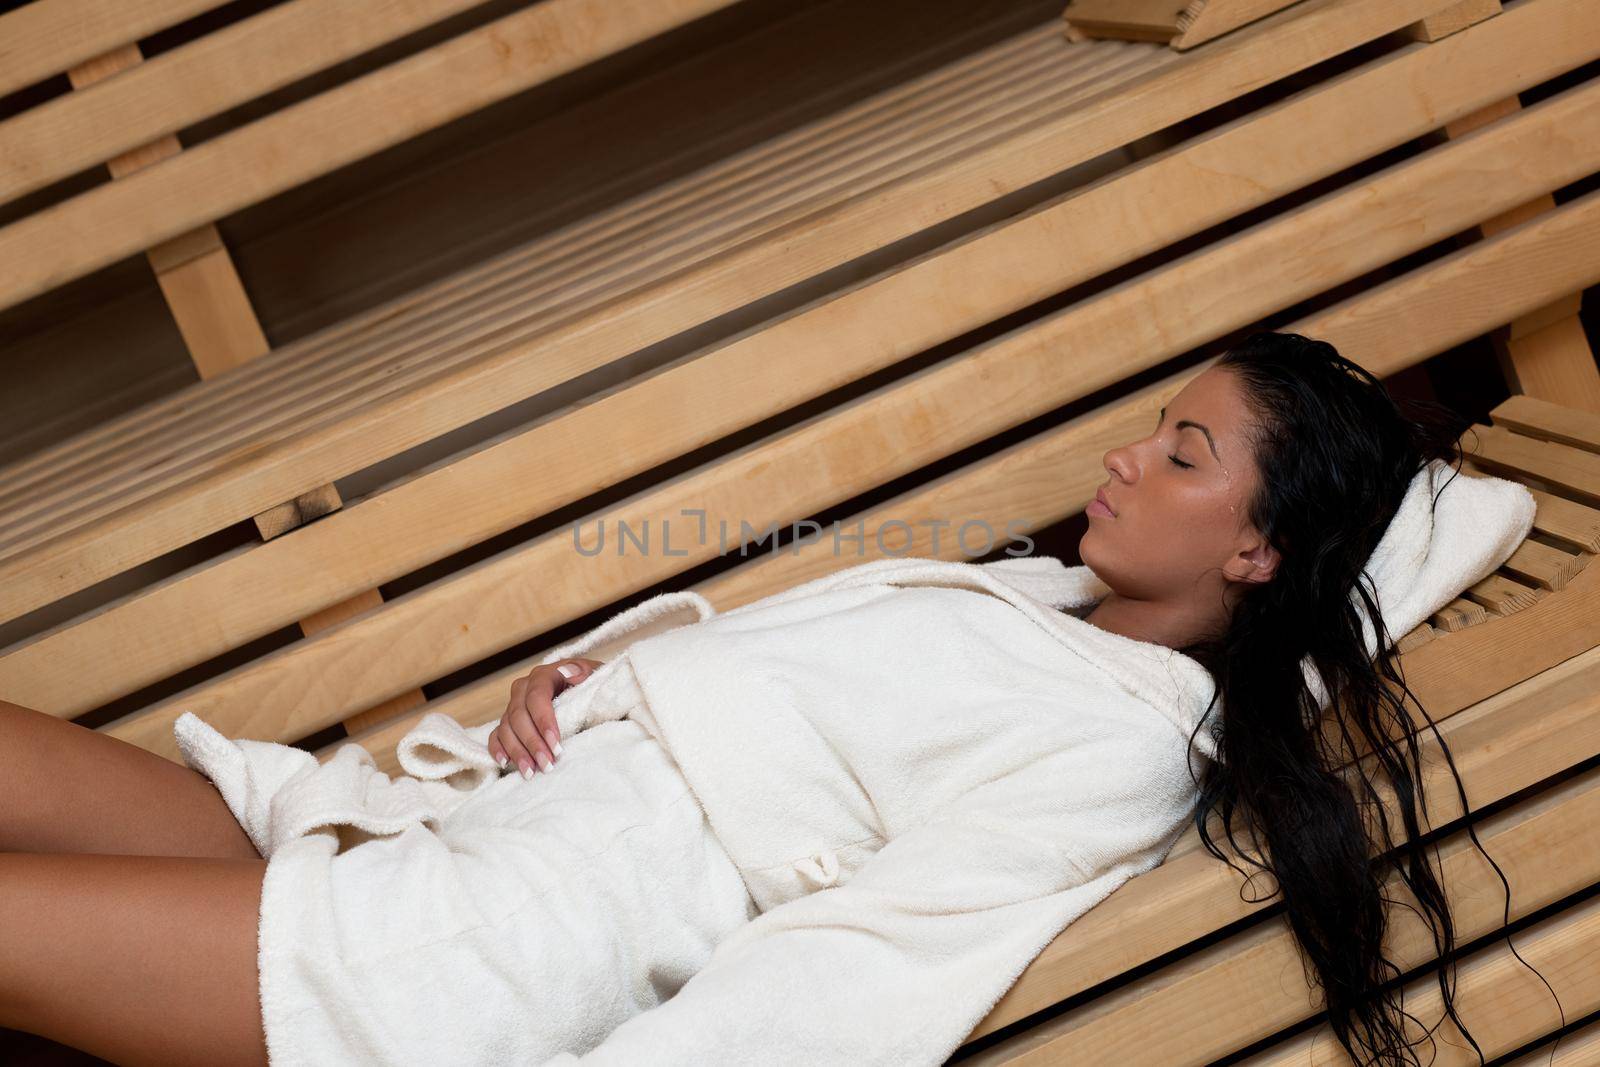 Pretty Young woman take a steam bath treatment at finish wooden sauna while wearing white towel